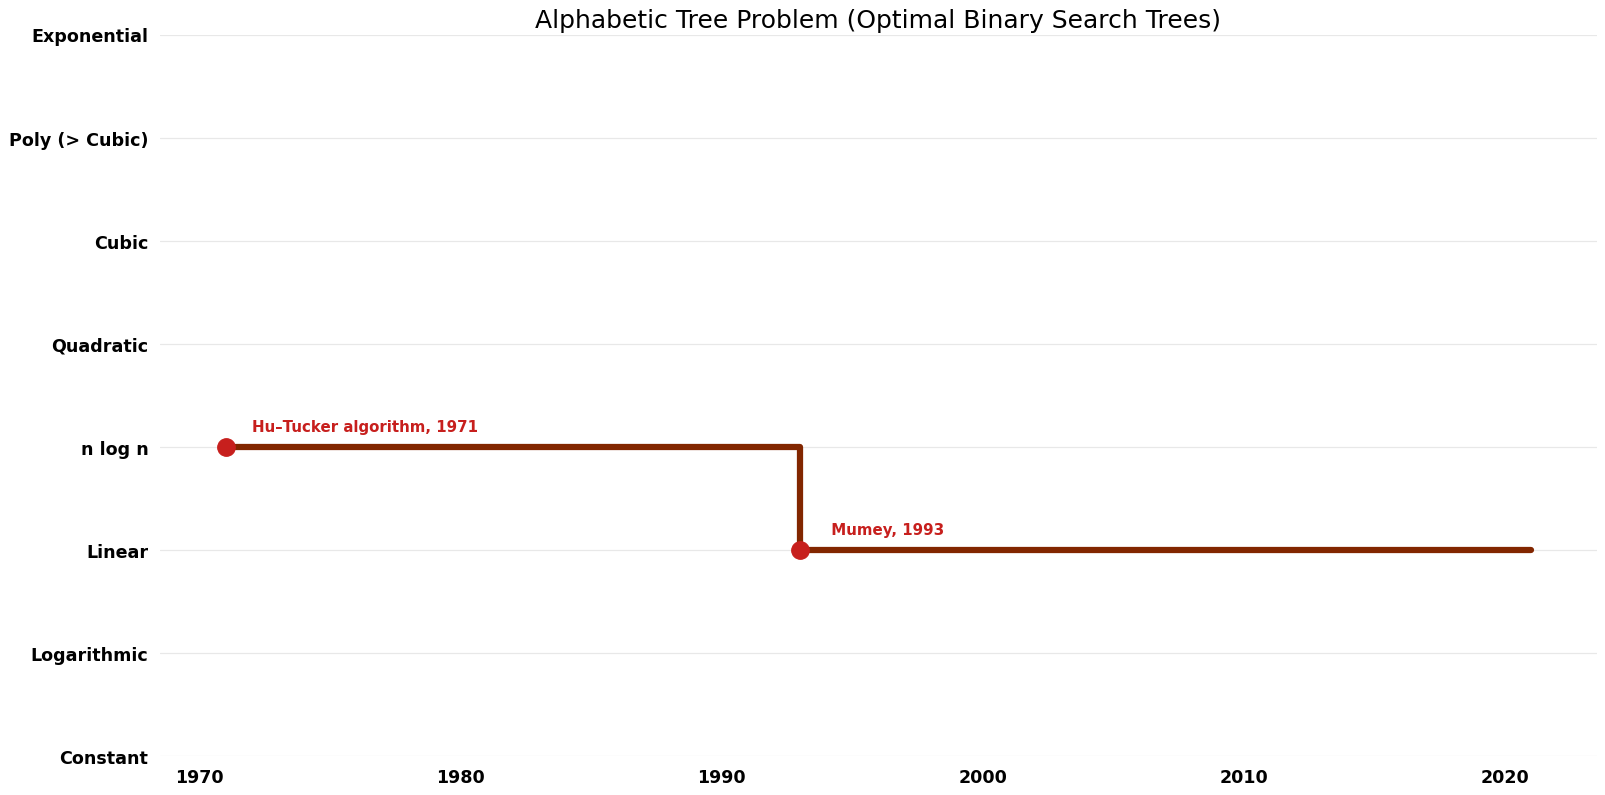 Optimal Binary Search Trees - Alphabetic Tree Problem - Time.png